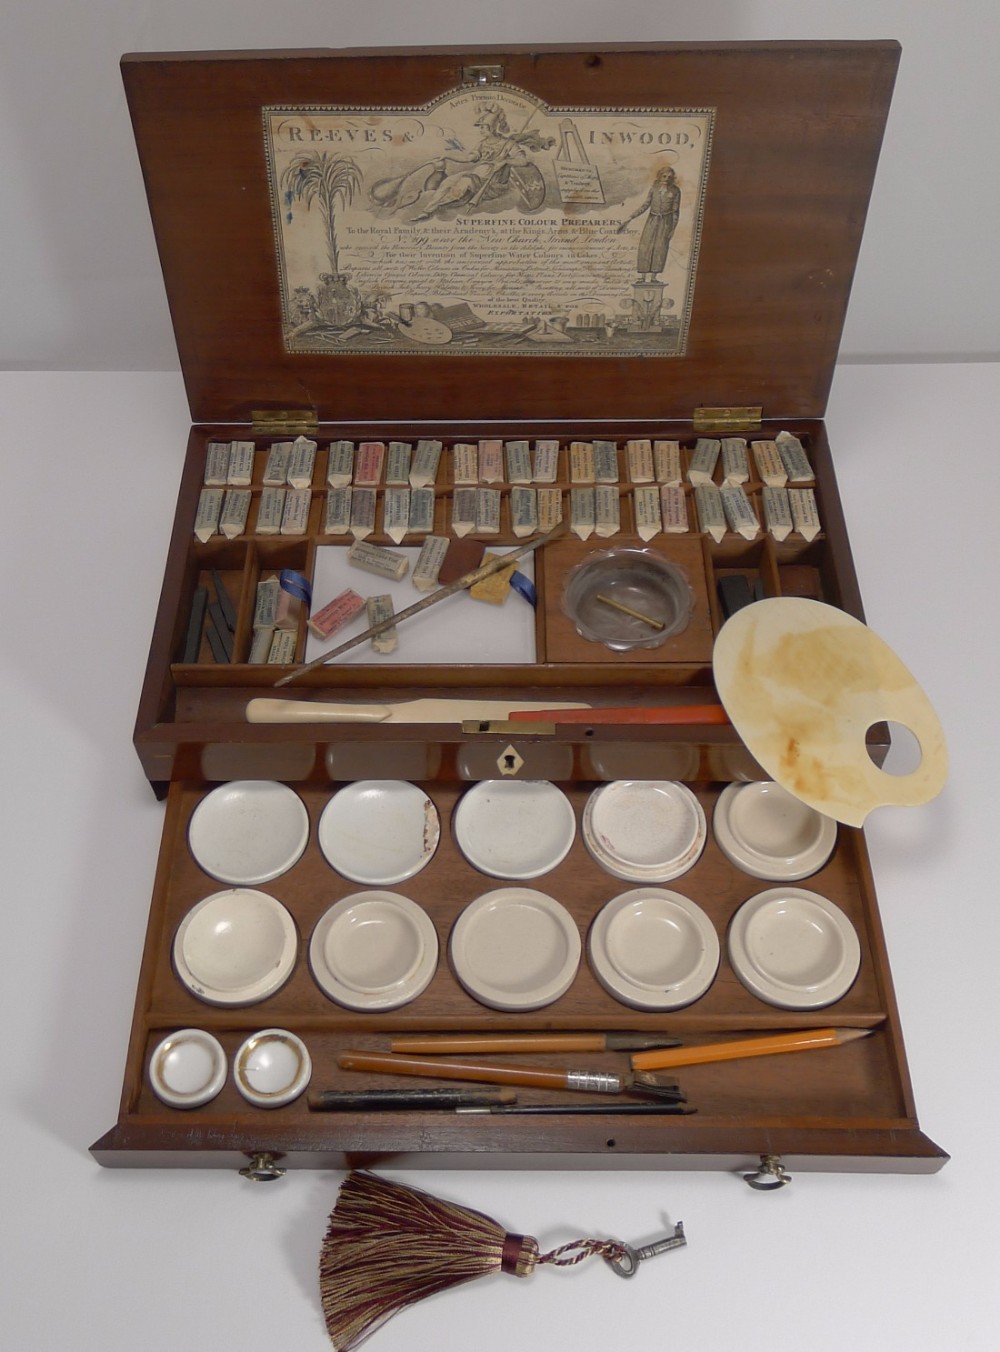 magnificent georgian artist watercolor paint box by reeves and inwood c1800